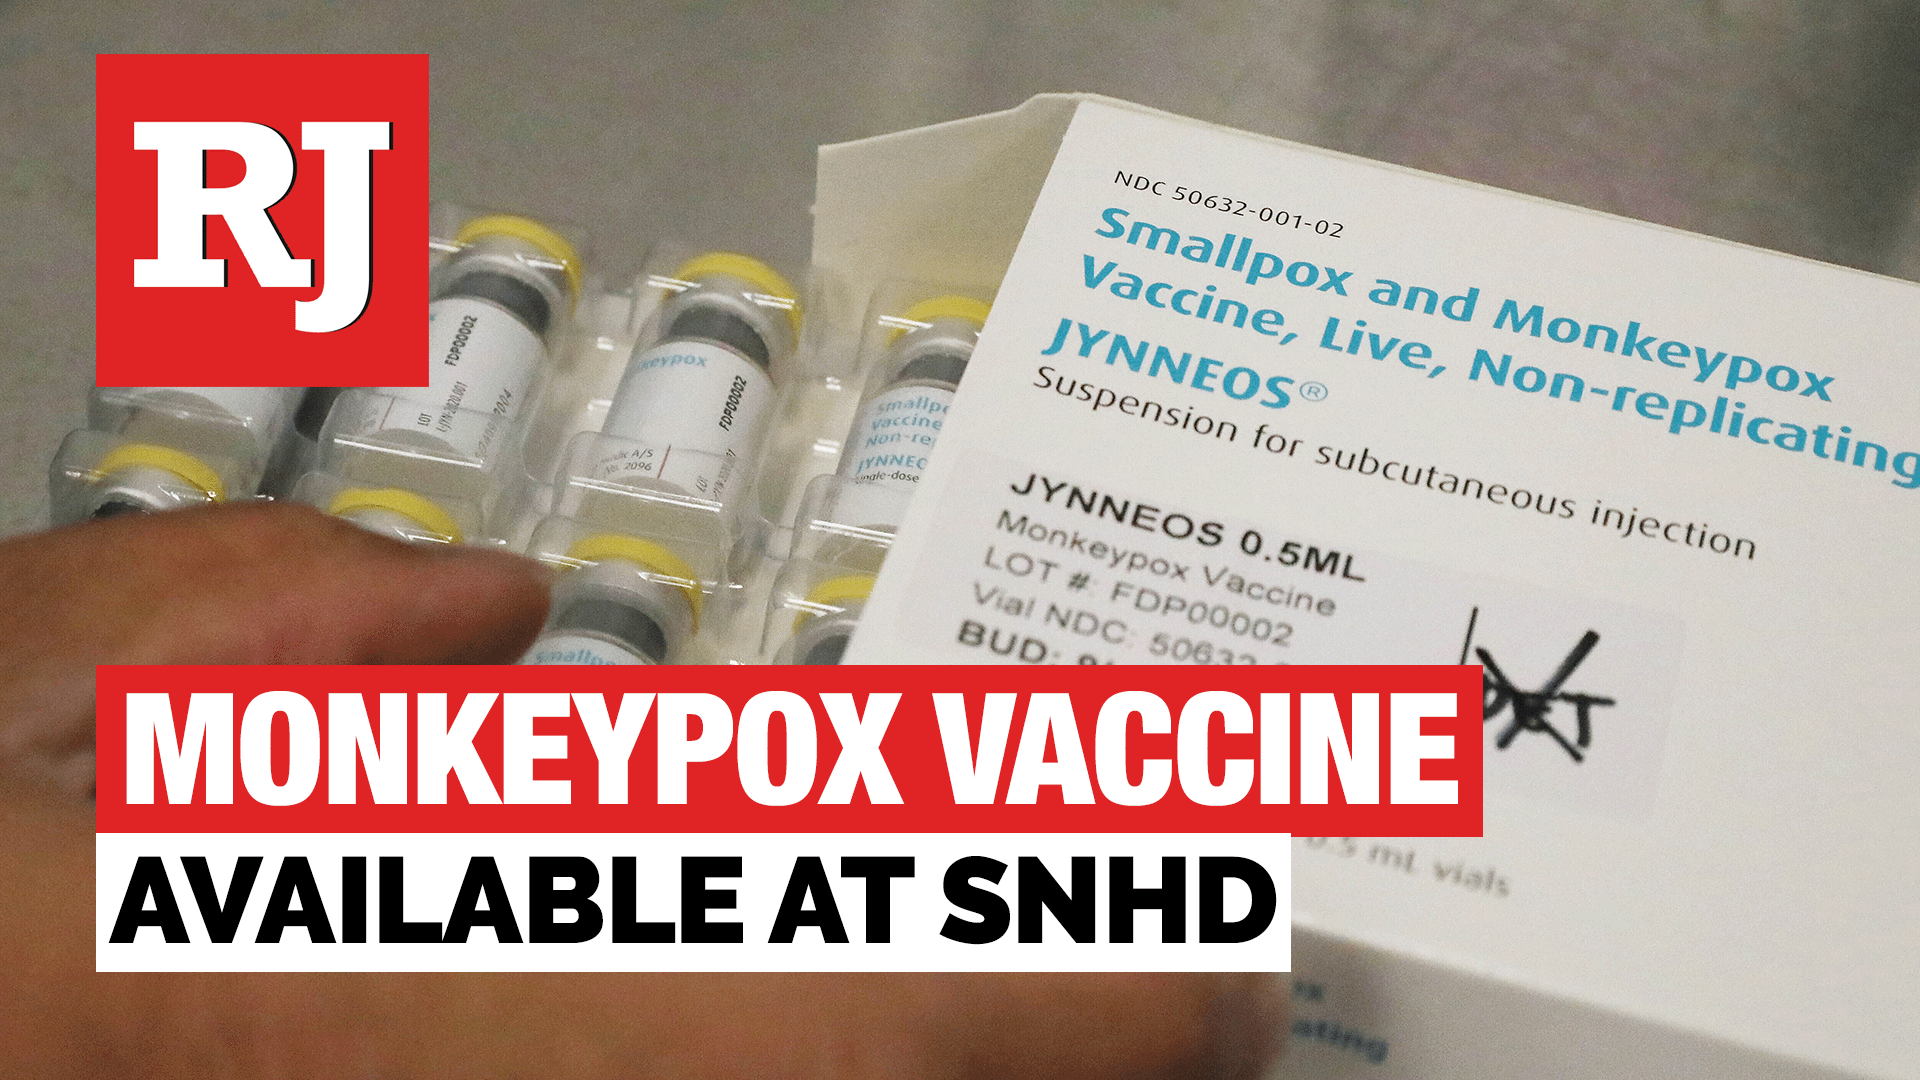 Southern Nevada Health District to discuss availability of monkeypox vaccine